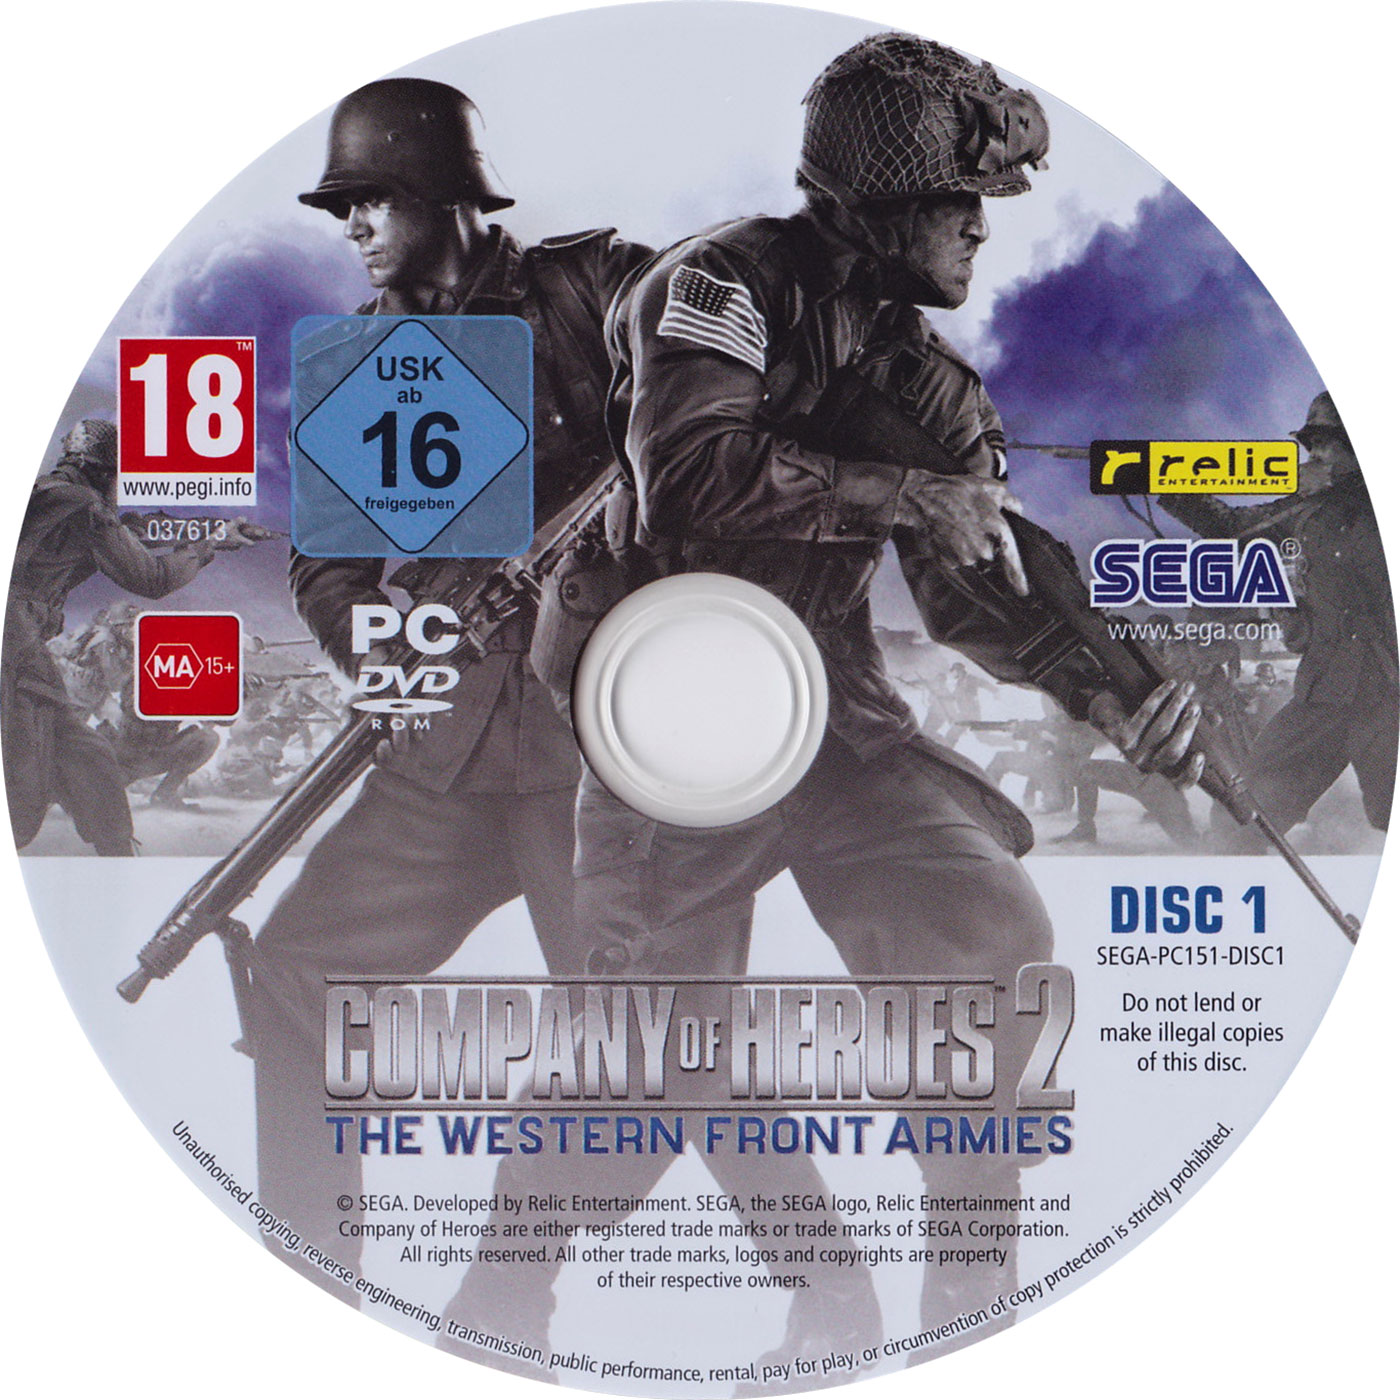 Company of Heroes 2: The Western Front Armies - CD obal